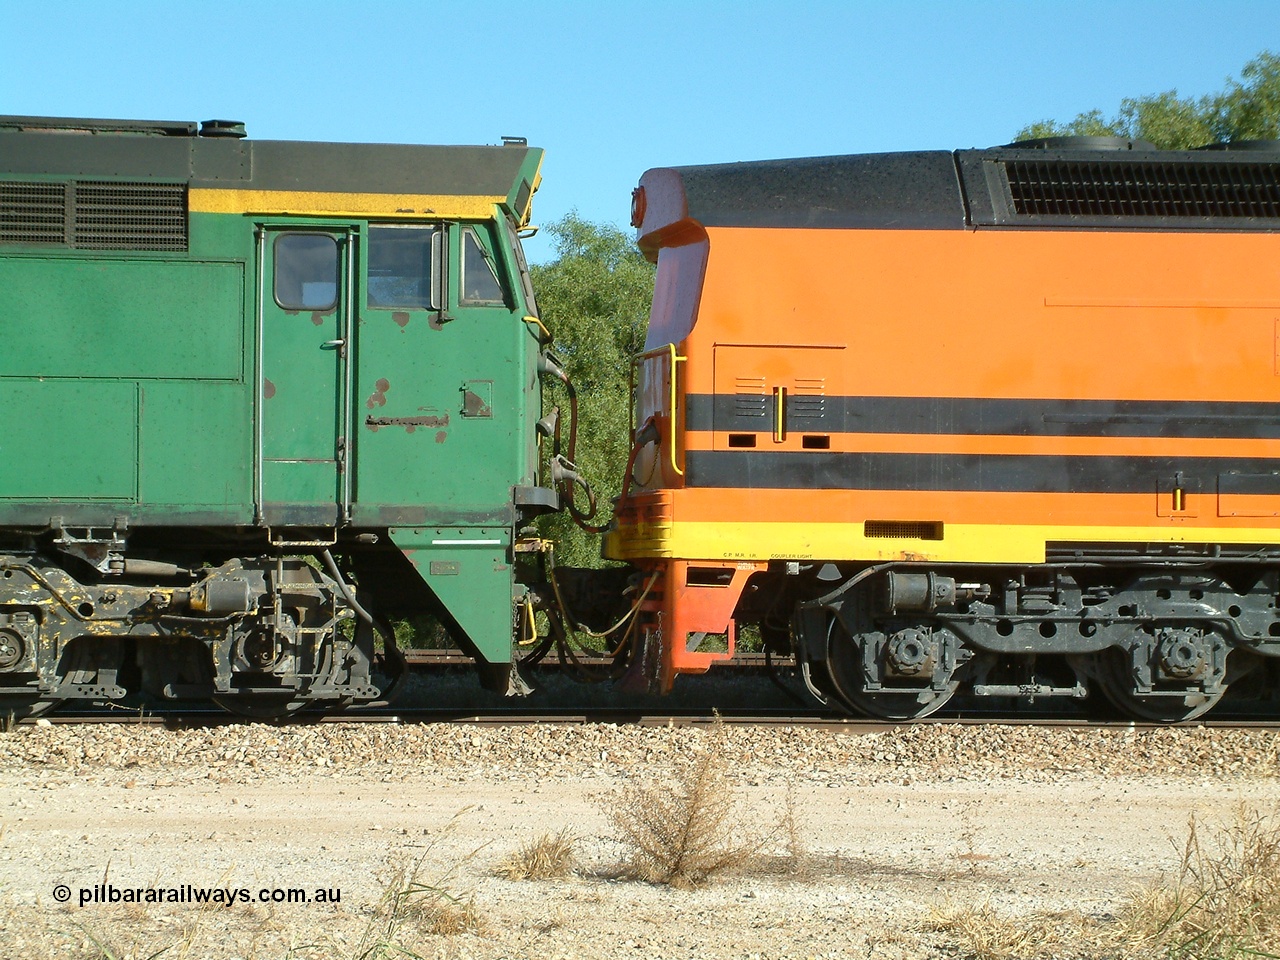 030403 154207
Gladstone, MKA (Morrison Knudsen Australia) rebuilt AL class AL 23 into EMD JT26C-2M model for Australian National in 1993 as the ALF class, here ALF 22 serial 94-AB-022 shows the blanked off No.2 end cab as it is coupled to an A E Goodwin built ALCo 700 class on the 3rd April 2003.
Keywords: ALF-class;ALF22;94-AN-022;MKA;EMD;JT26C-2M;AL-class;